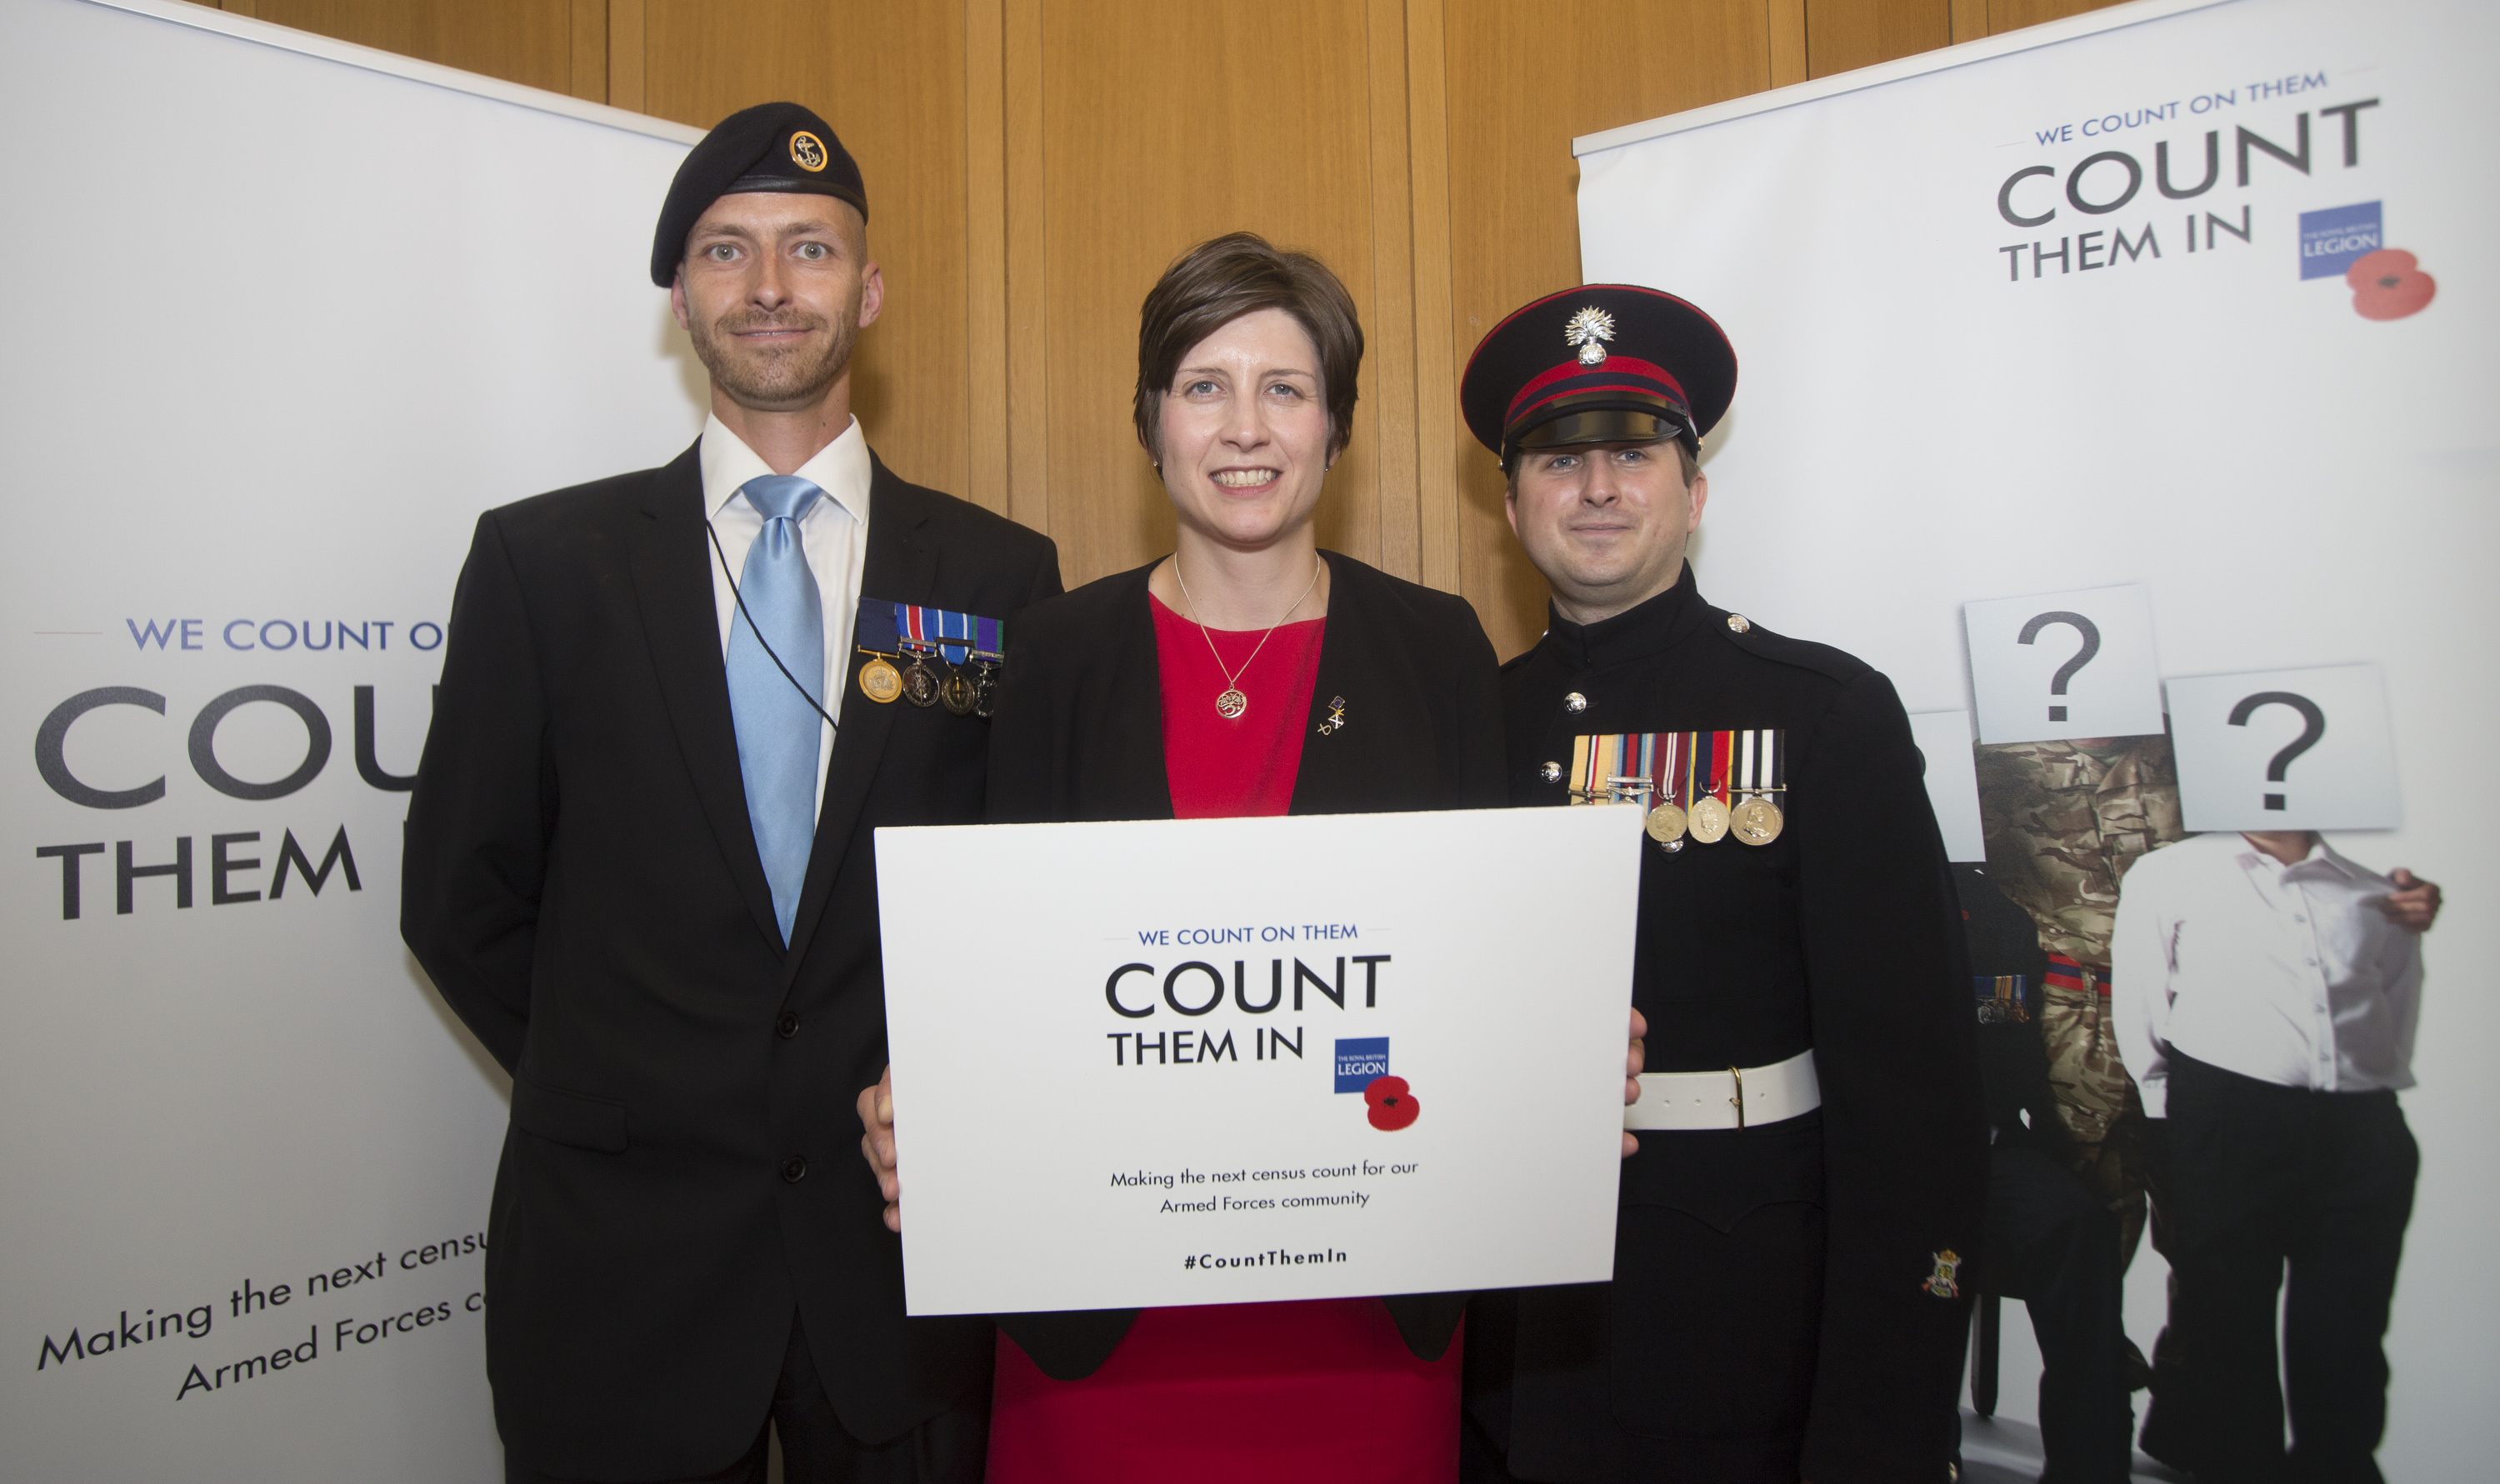 Alison Thewliss MP pledges to Count Armed Forces Community In